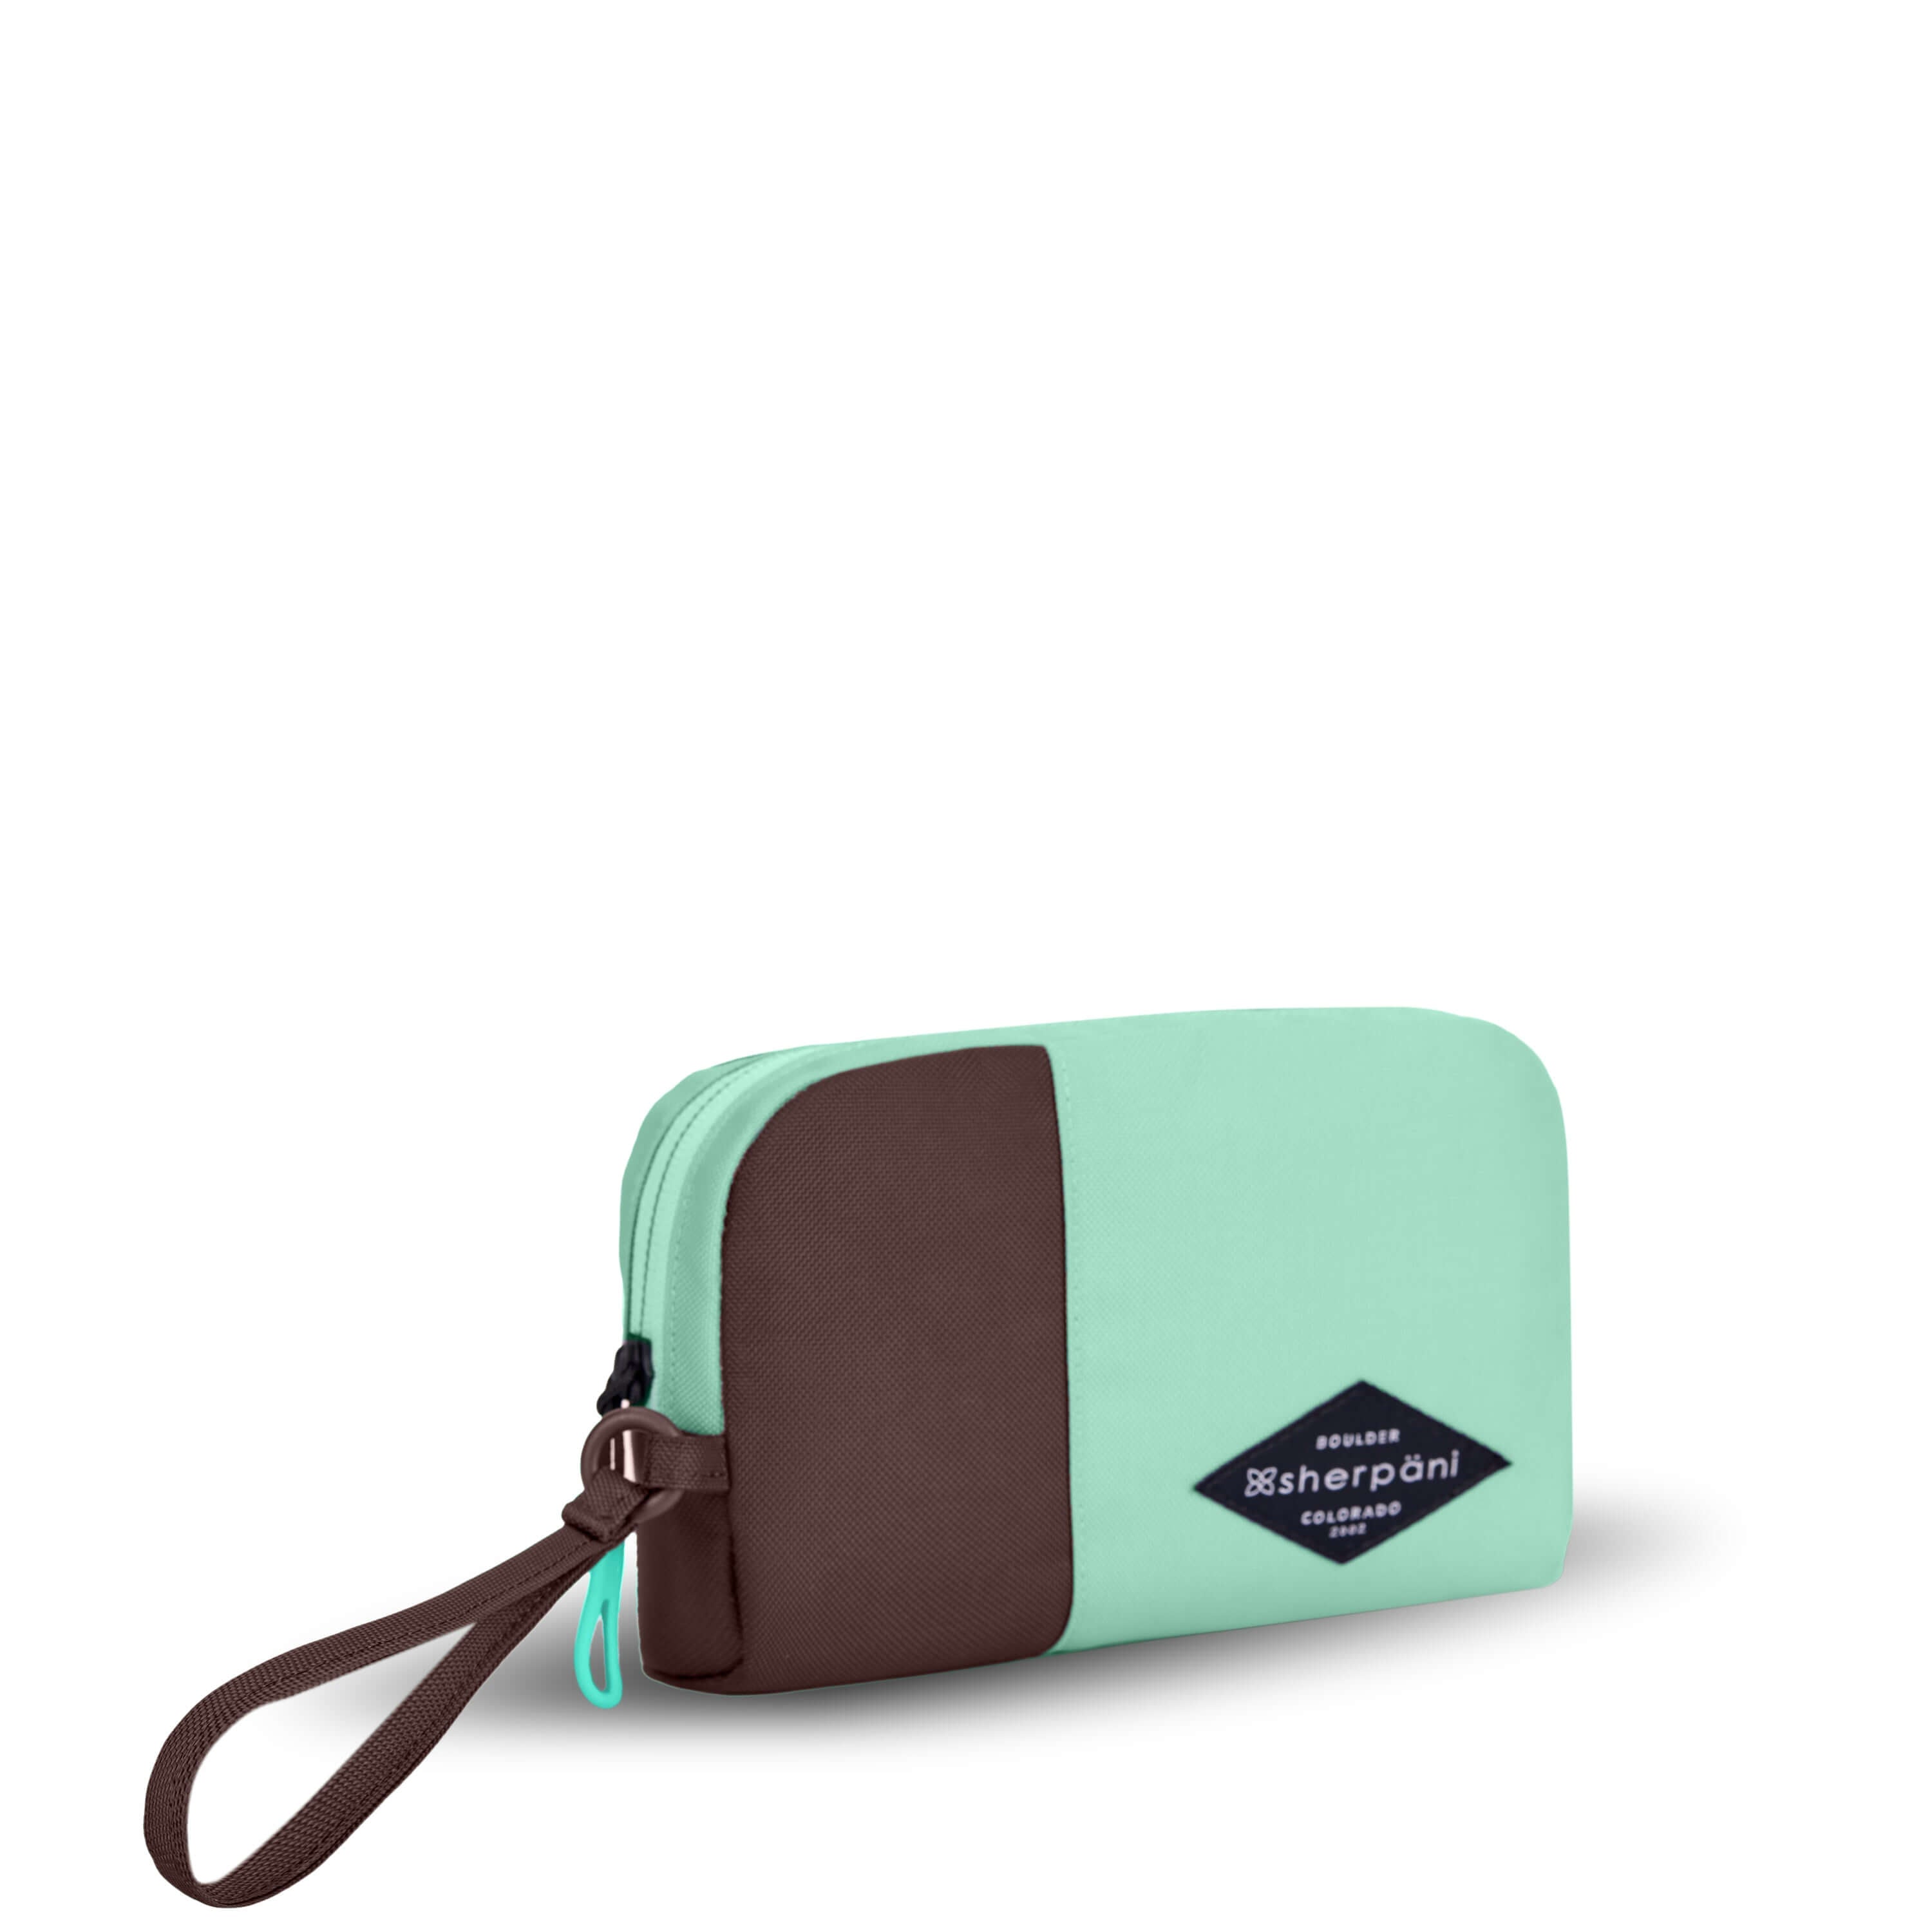 Angled front view of Sherpani travel accessory, the Jolie in Seagreen, in medium size. The pouch is two-toned in light green and brown. It features a brown wristlet strap and an easy-pull zipper accented in light green. #color_seagreen